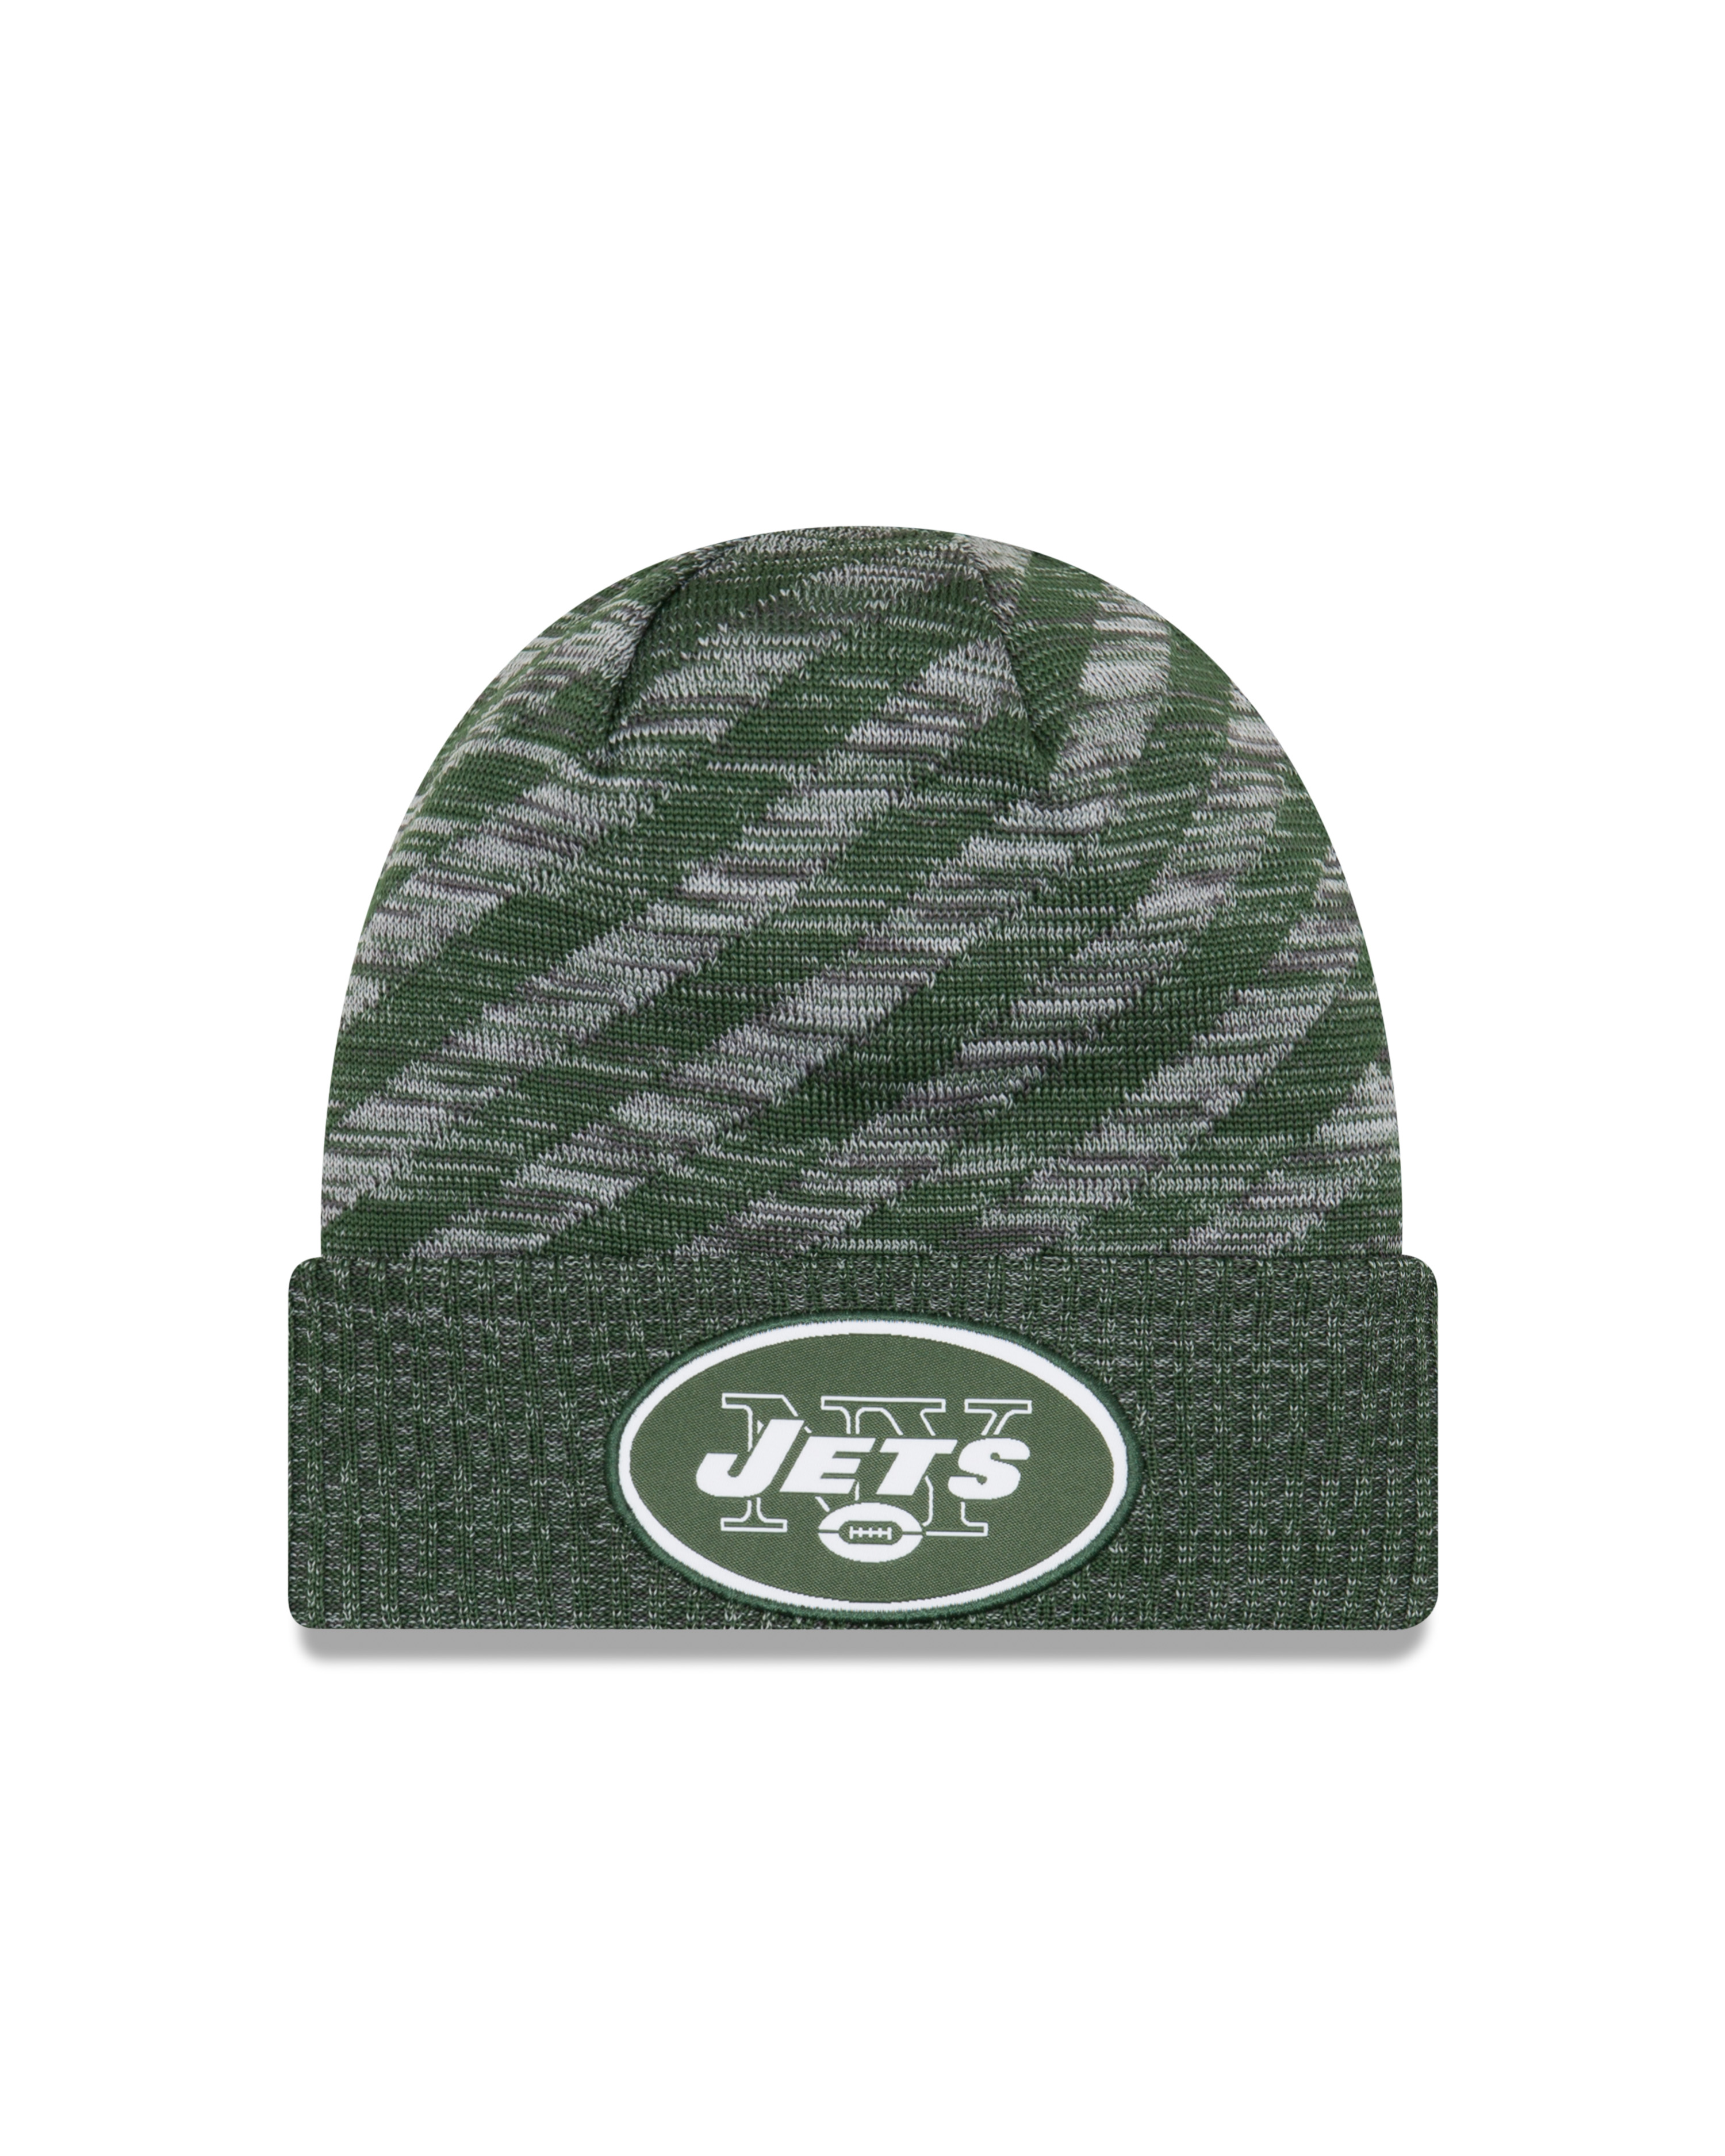 New Era Official NFL Cold Weather Collection #9